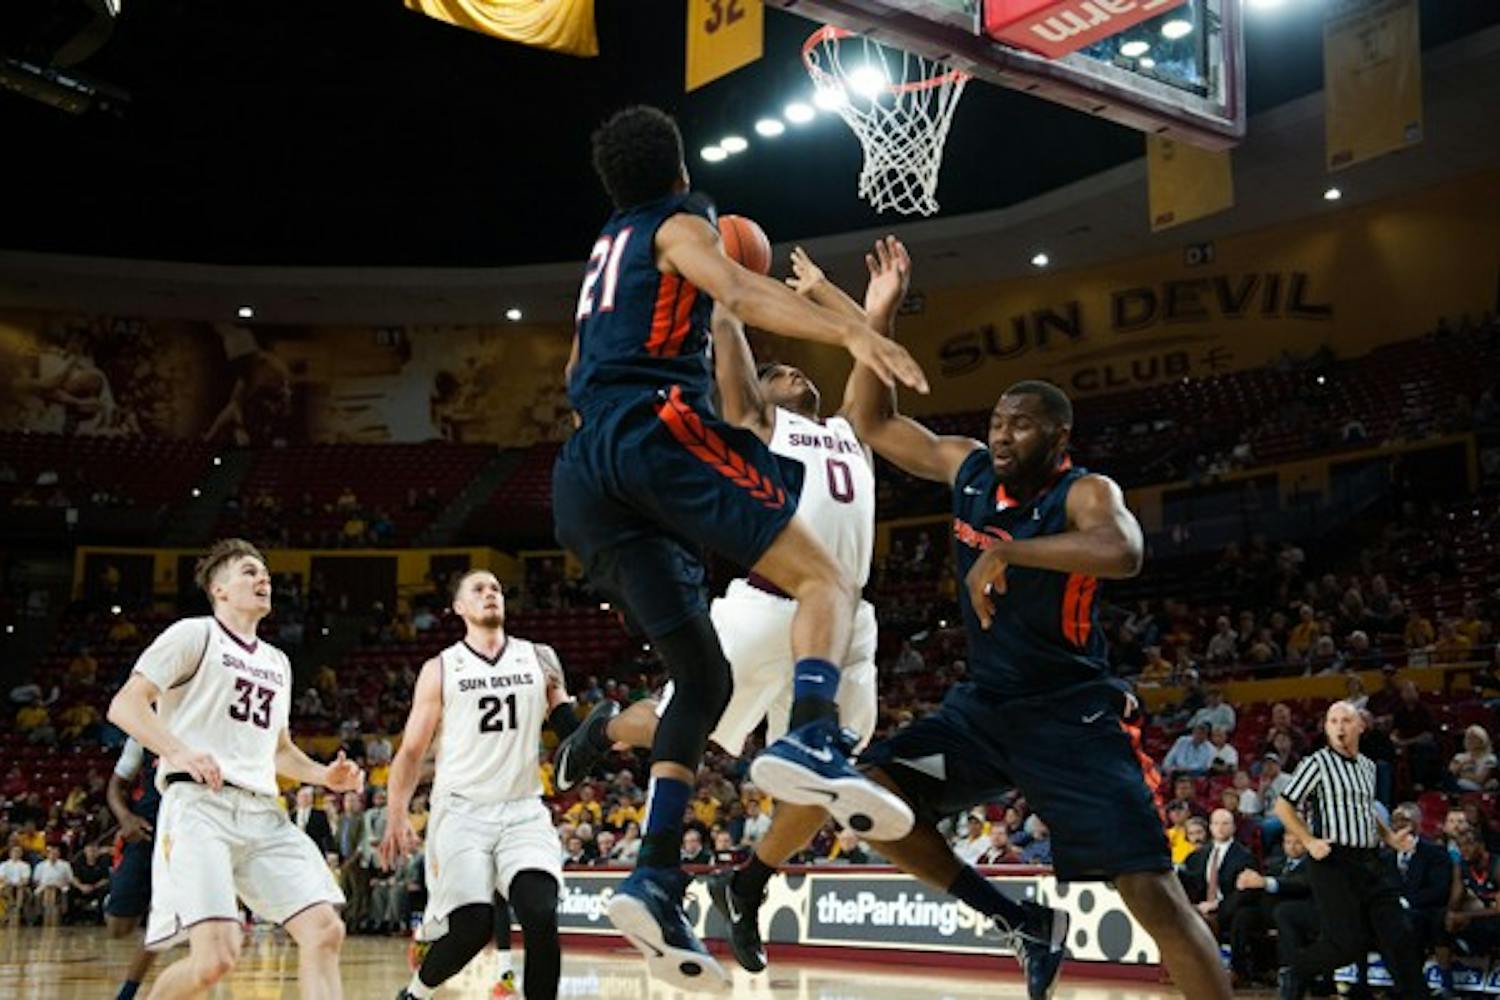 Freshman guard Tra Holder goes up for a layup in a game against Pepperdine, Saturday, Dec. 13, 2014 at Wells Fargo Arena in Tempe. After trailing the entire first half, the Sun Devils came from behind and defeated the Waves 81-74. (Photo by Ben Moffat)